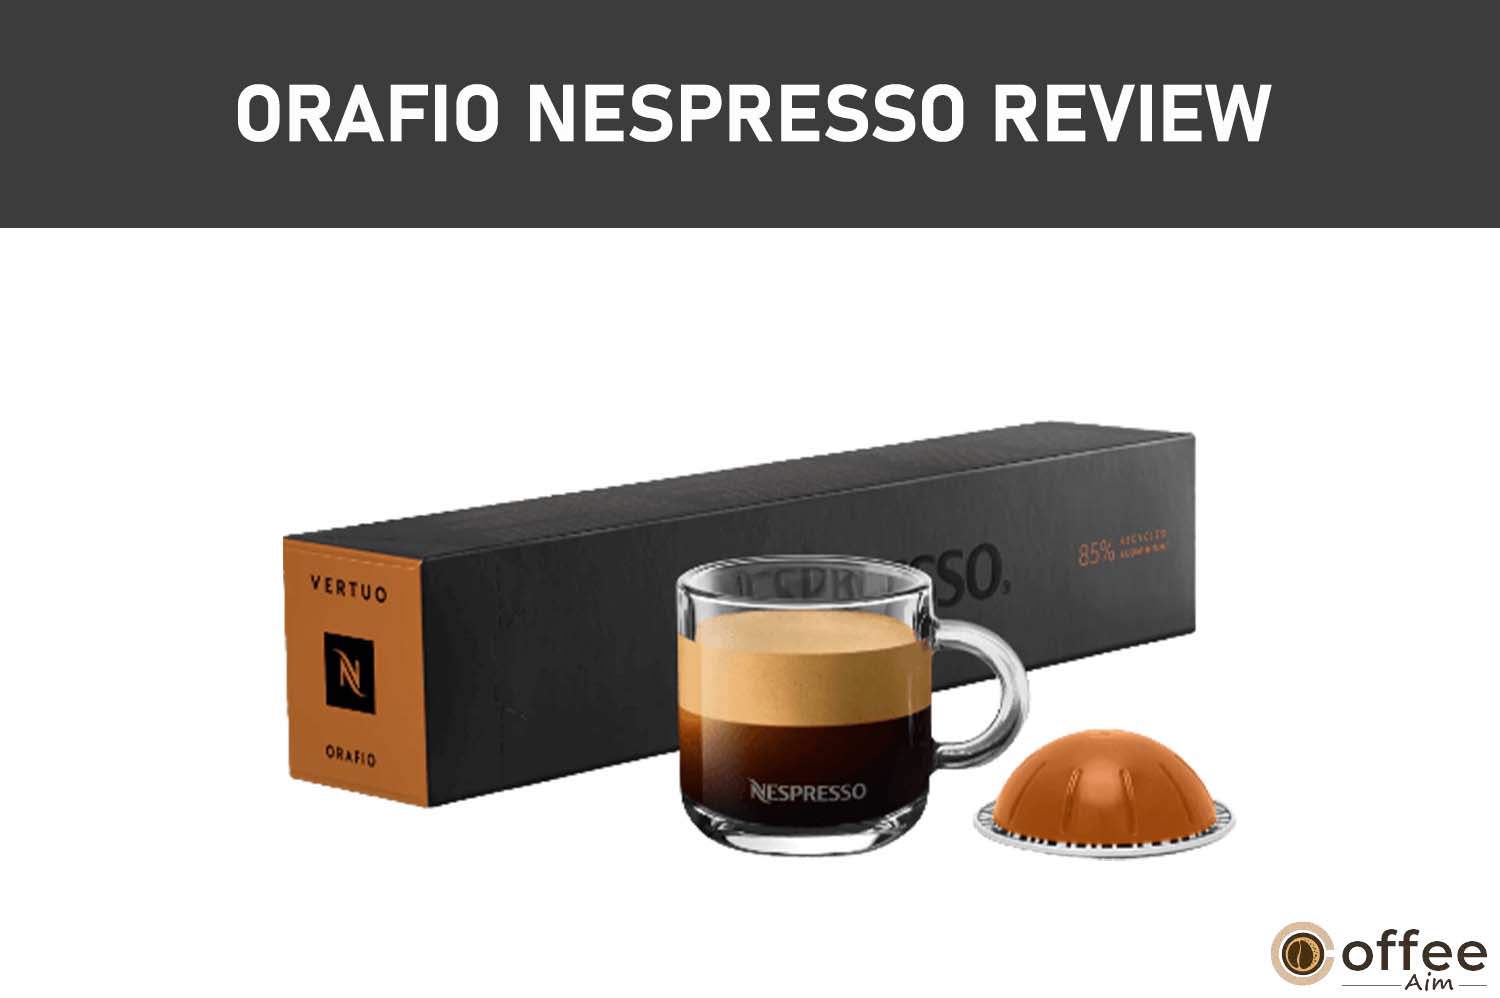 Featured image for the article "Orafio Nespresso Review"